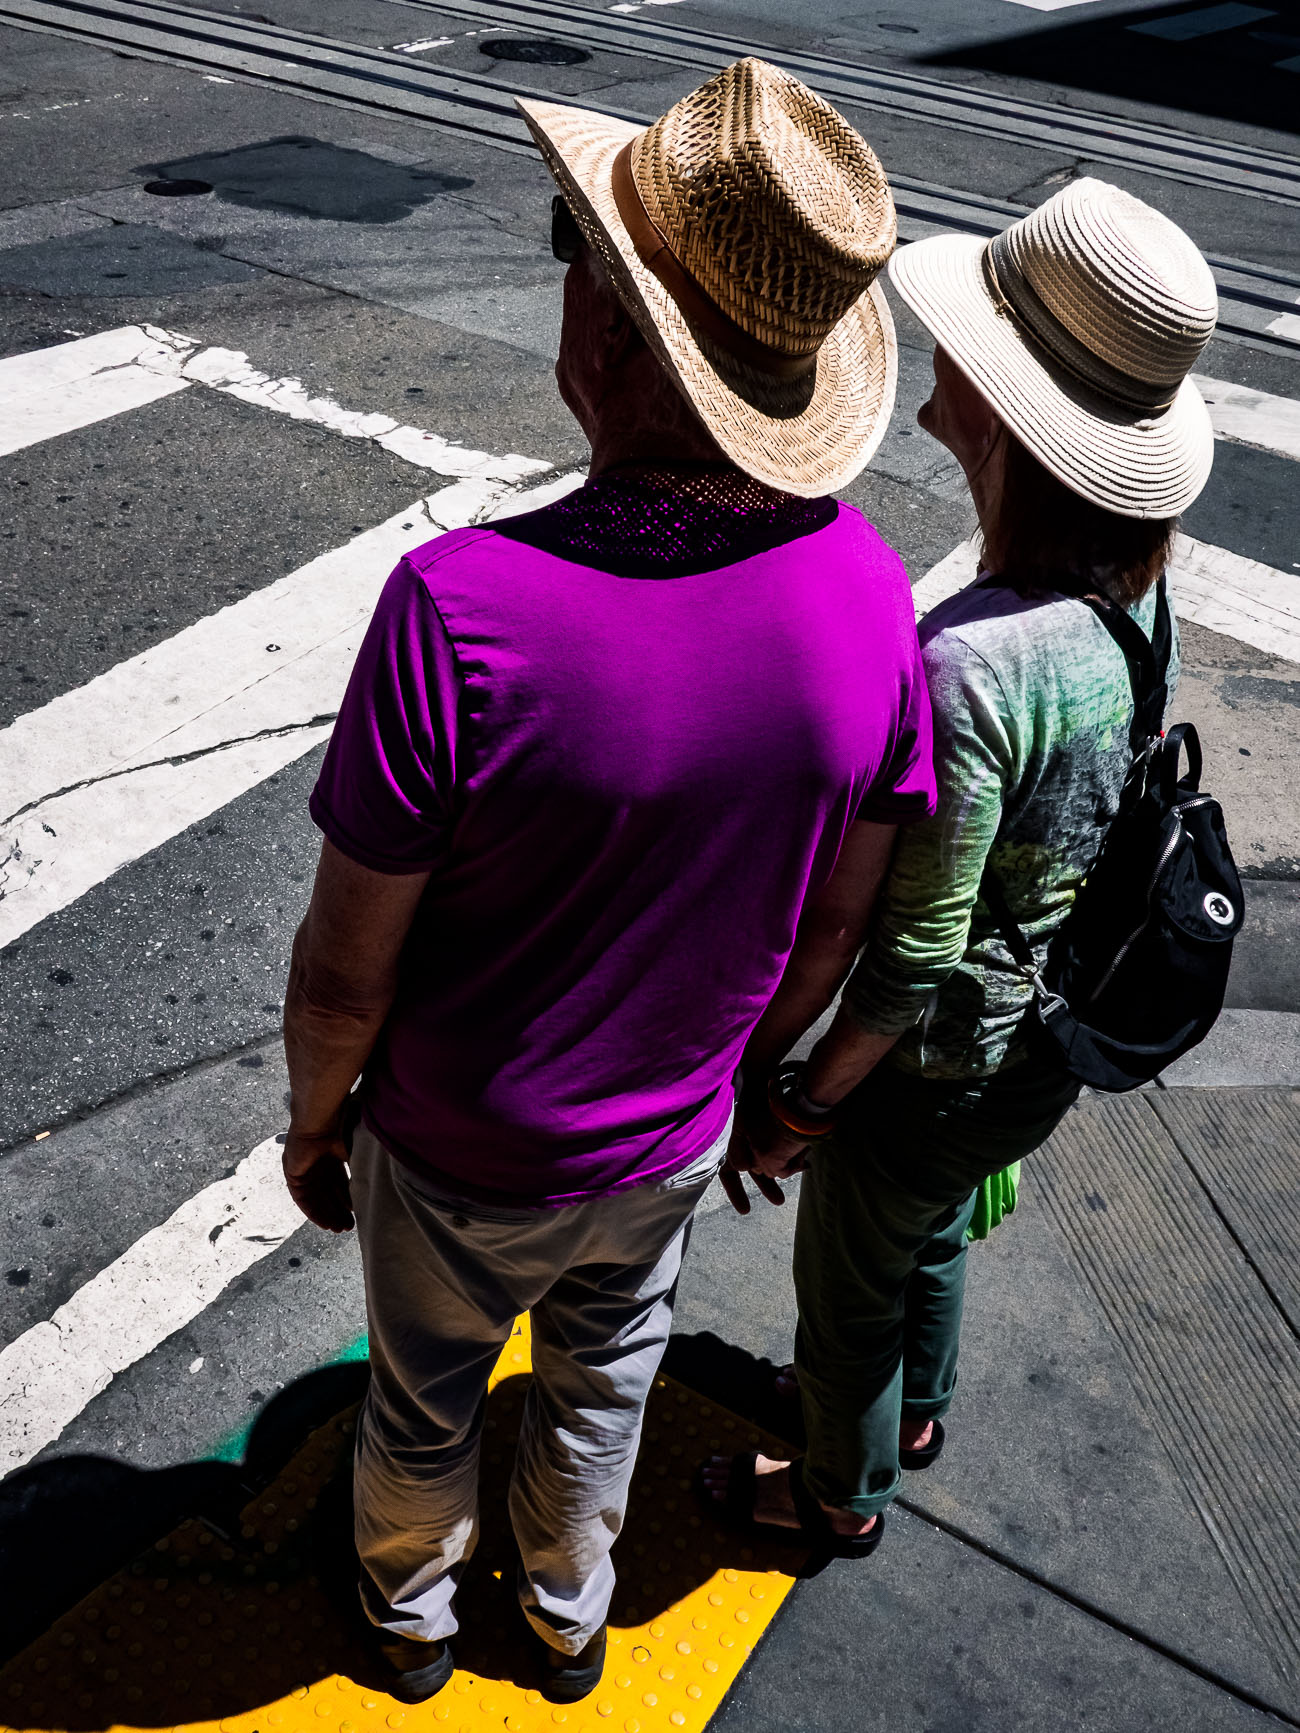 Couple waiting to cross the street in Mission district in San Francisco